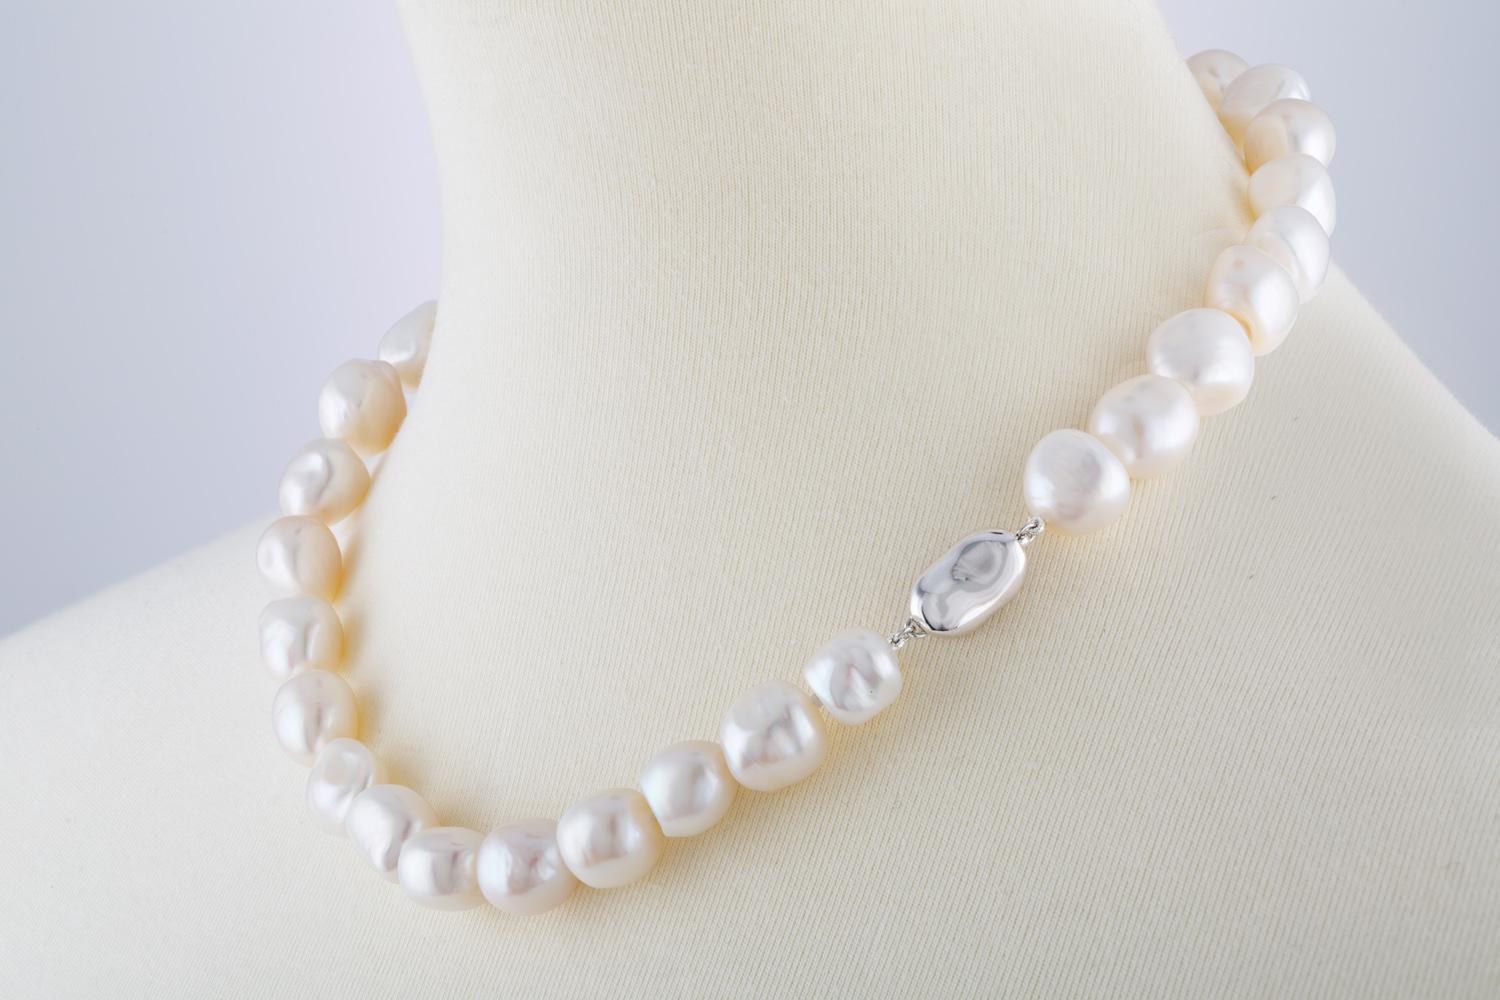 This necklace features Chinese Freshwater white baroque cultured pearls measuring 10-12mm.
These organic shaped lustrous pearls are strung knotted with a silver color metal clasp.
Great for everyday casual elegance or dressing up.
The silver color